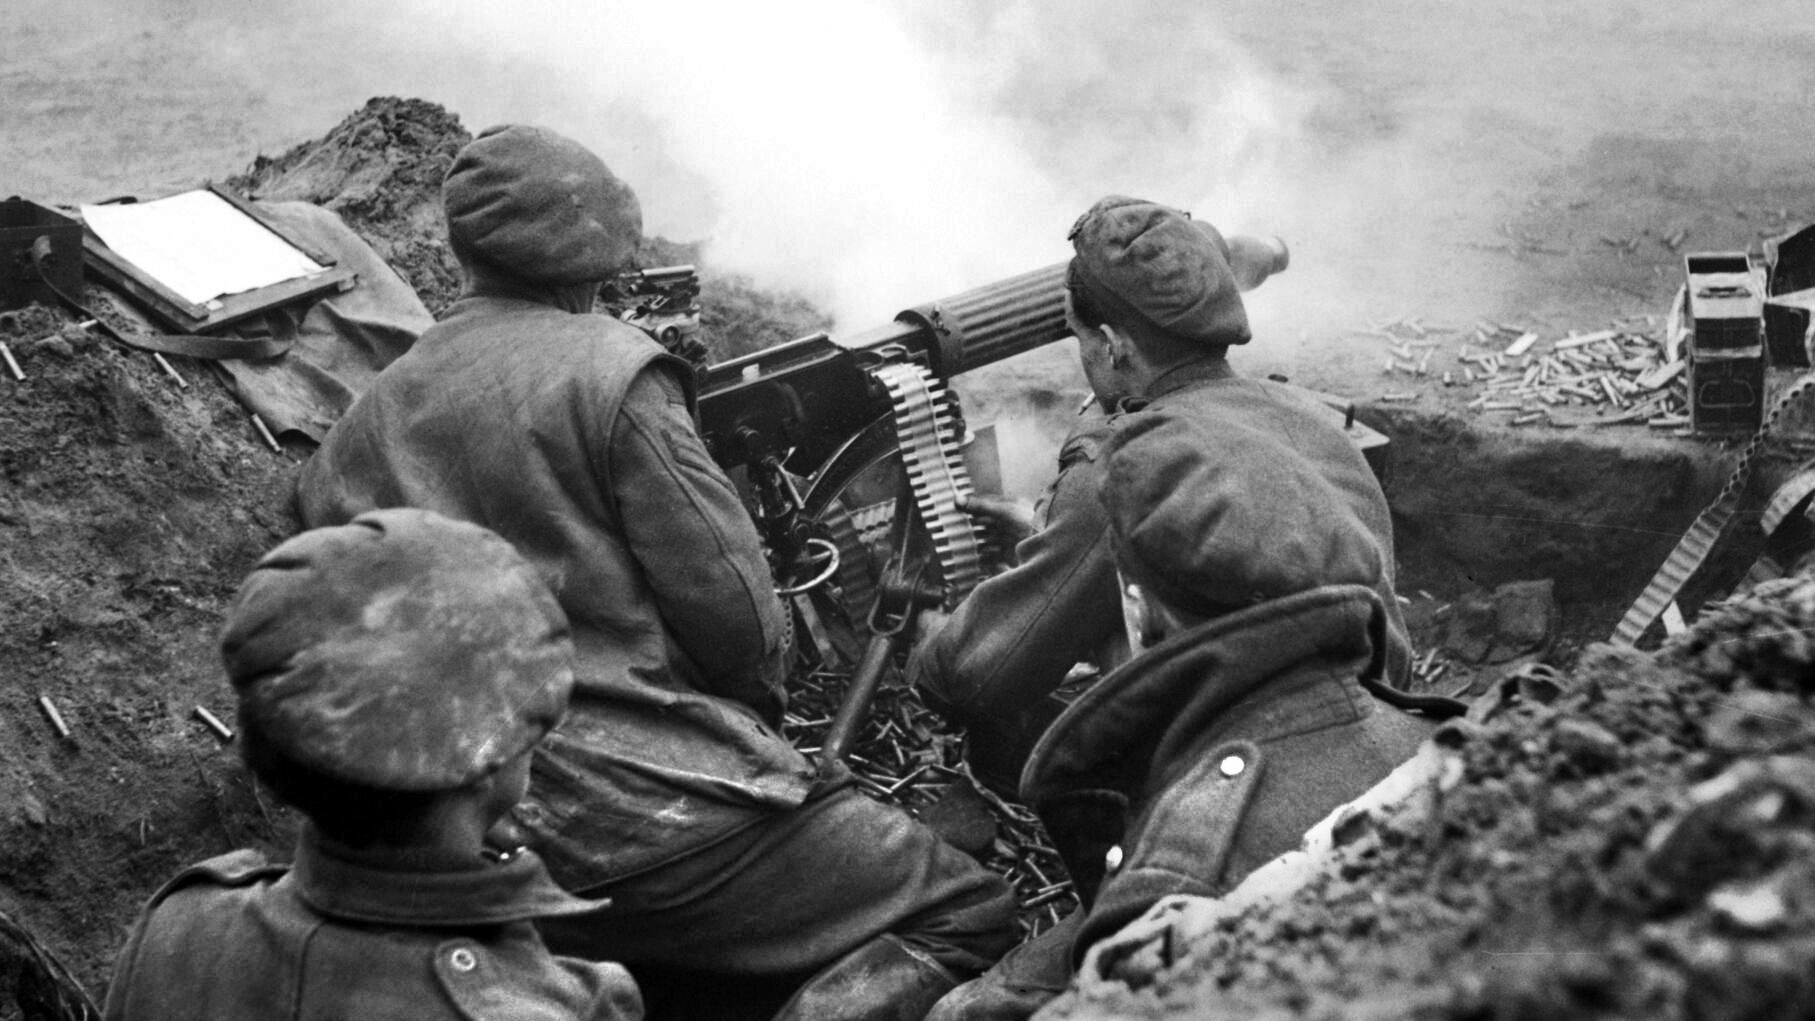 Soldiers of the 154th Infantry Brigade (part of the 51st (Highland) Infantry Division) man a Vickers machine gun in support of the advance of Operation Veritable from Holland into Germany on February 8, 1945.